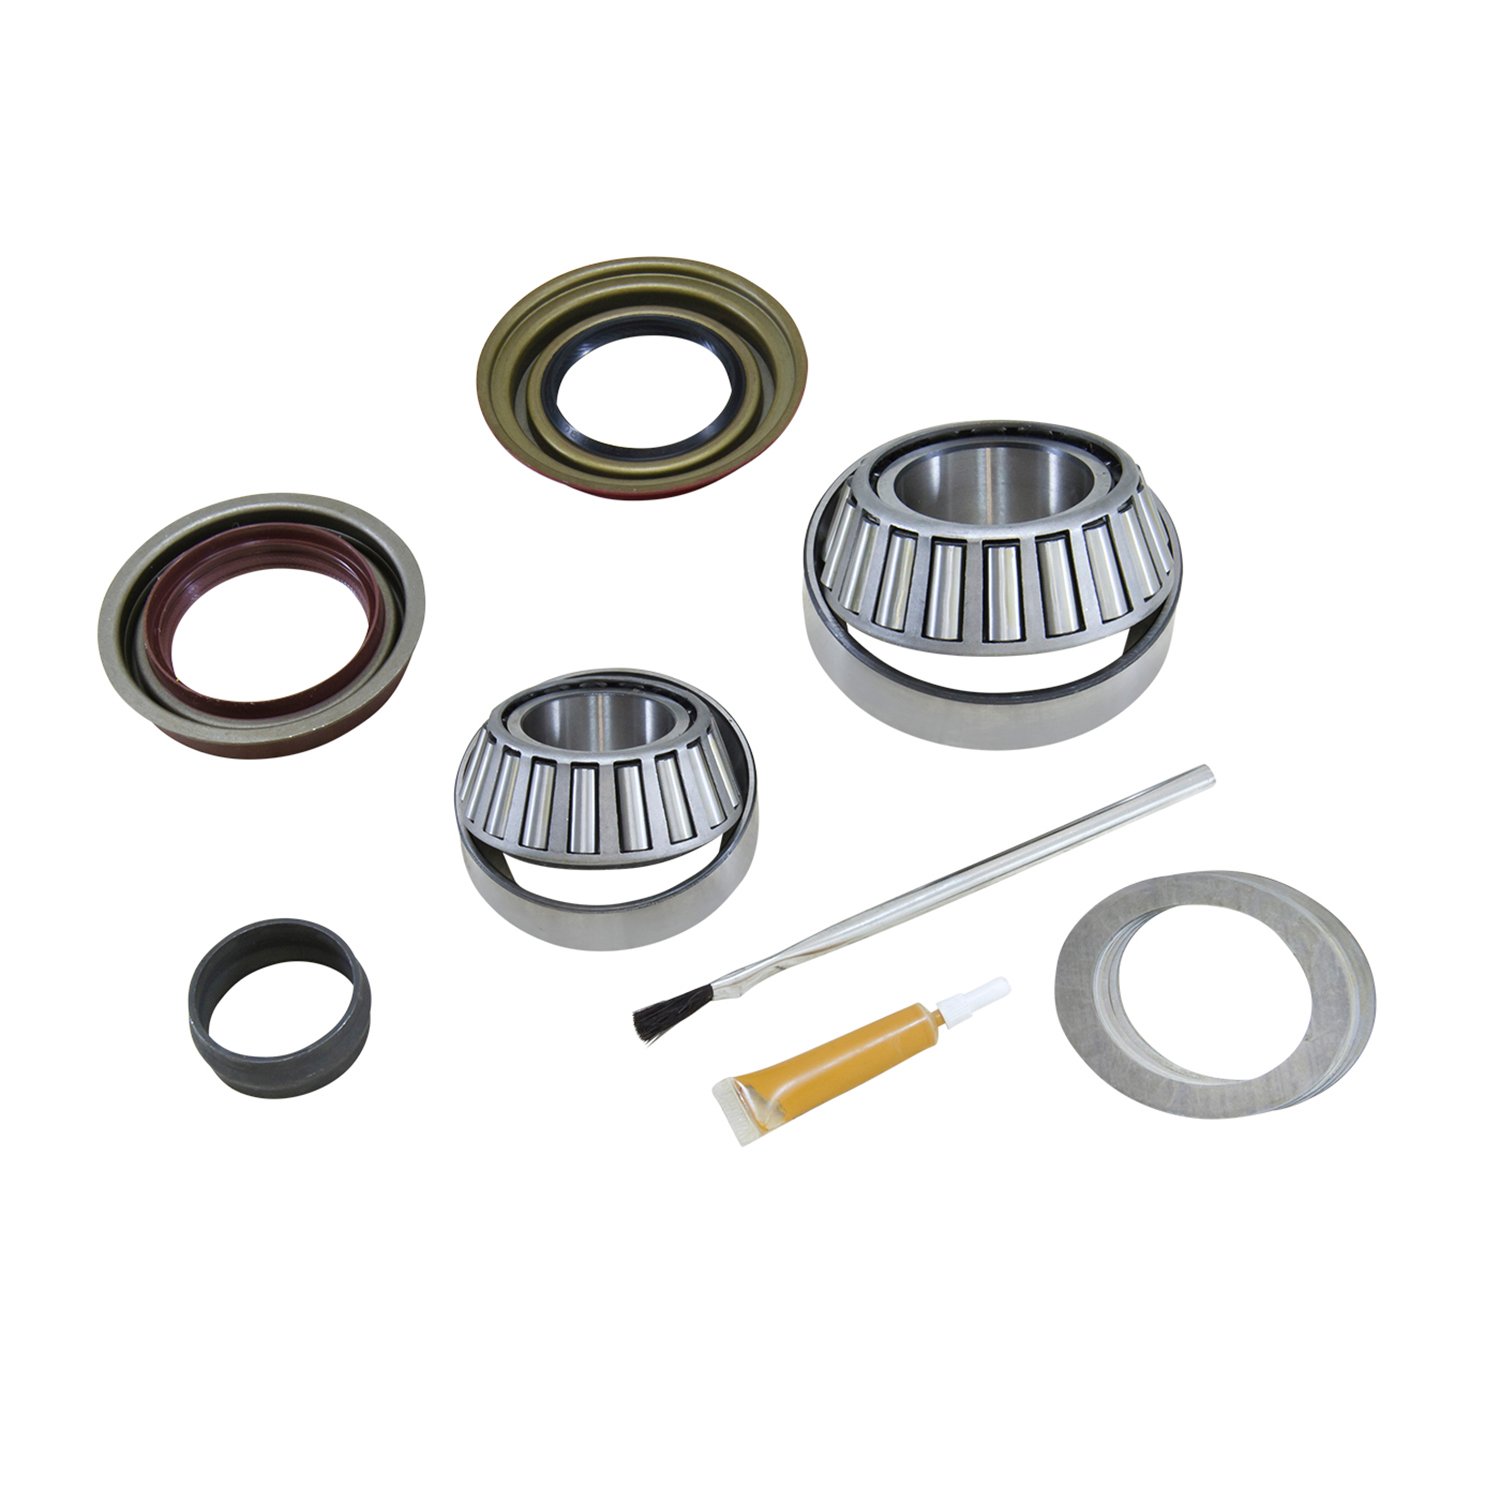 Pinion Install Kit, 9.76 in. To 9.5 in. GM 12 Bolt Conversion, 2014 +